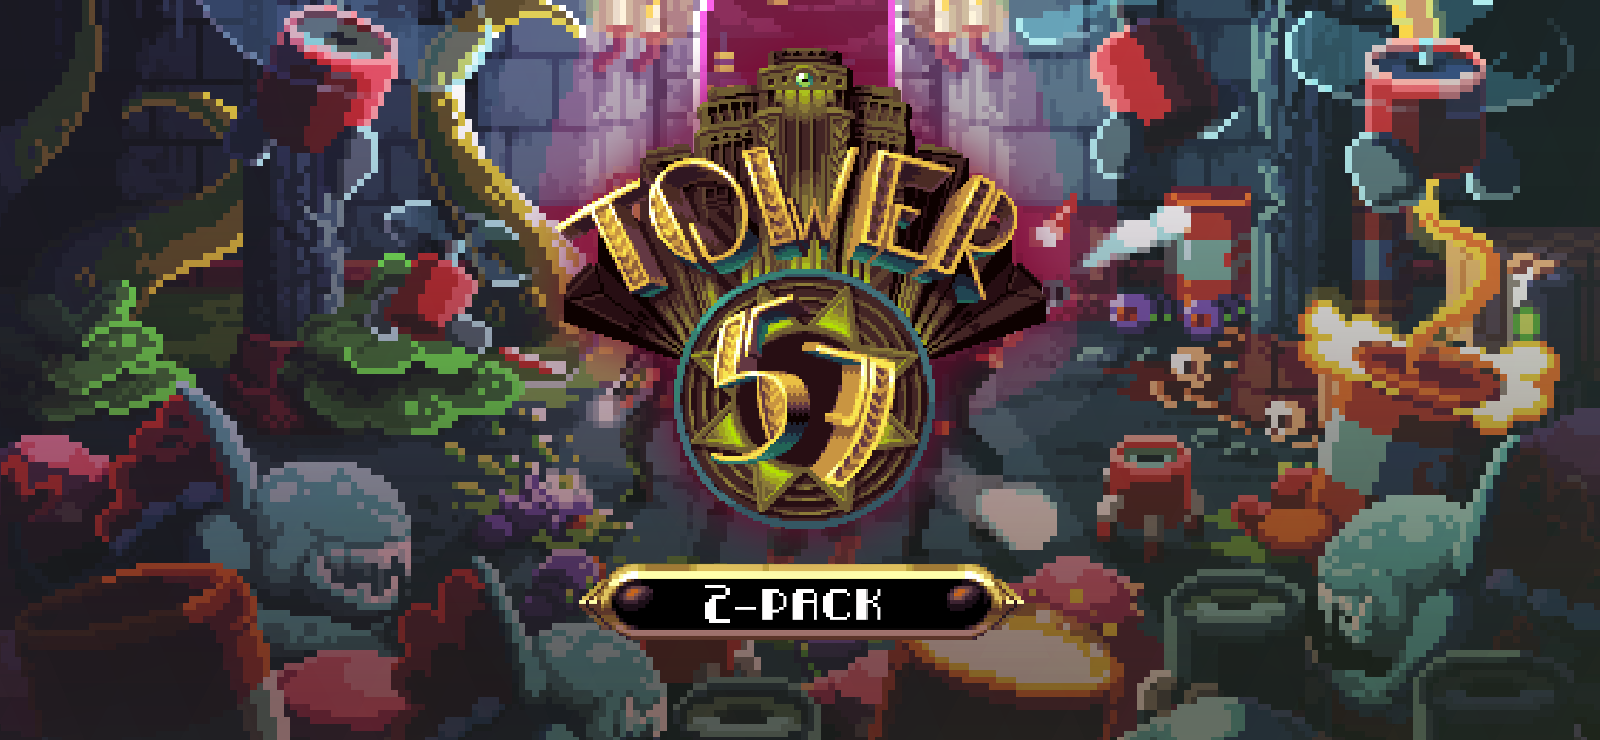 Tower 57 Two-pack